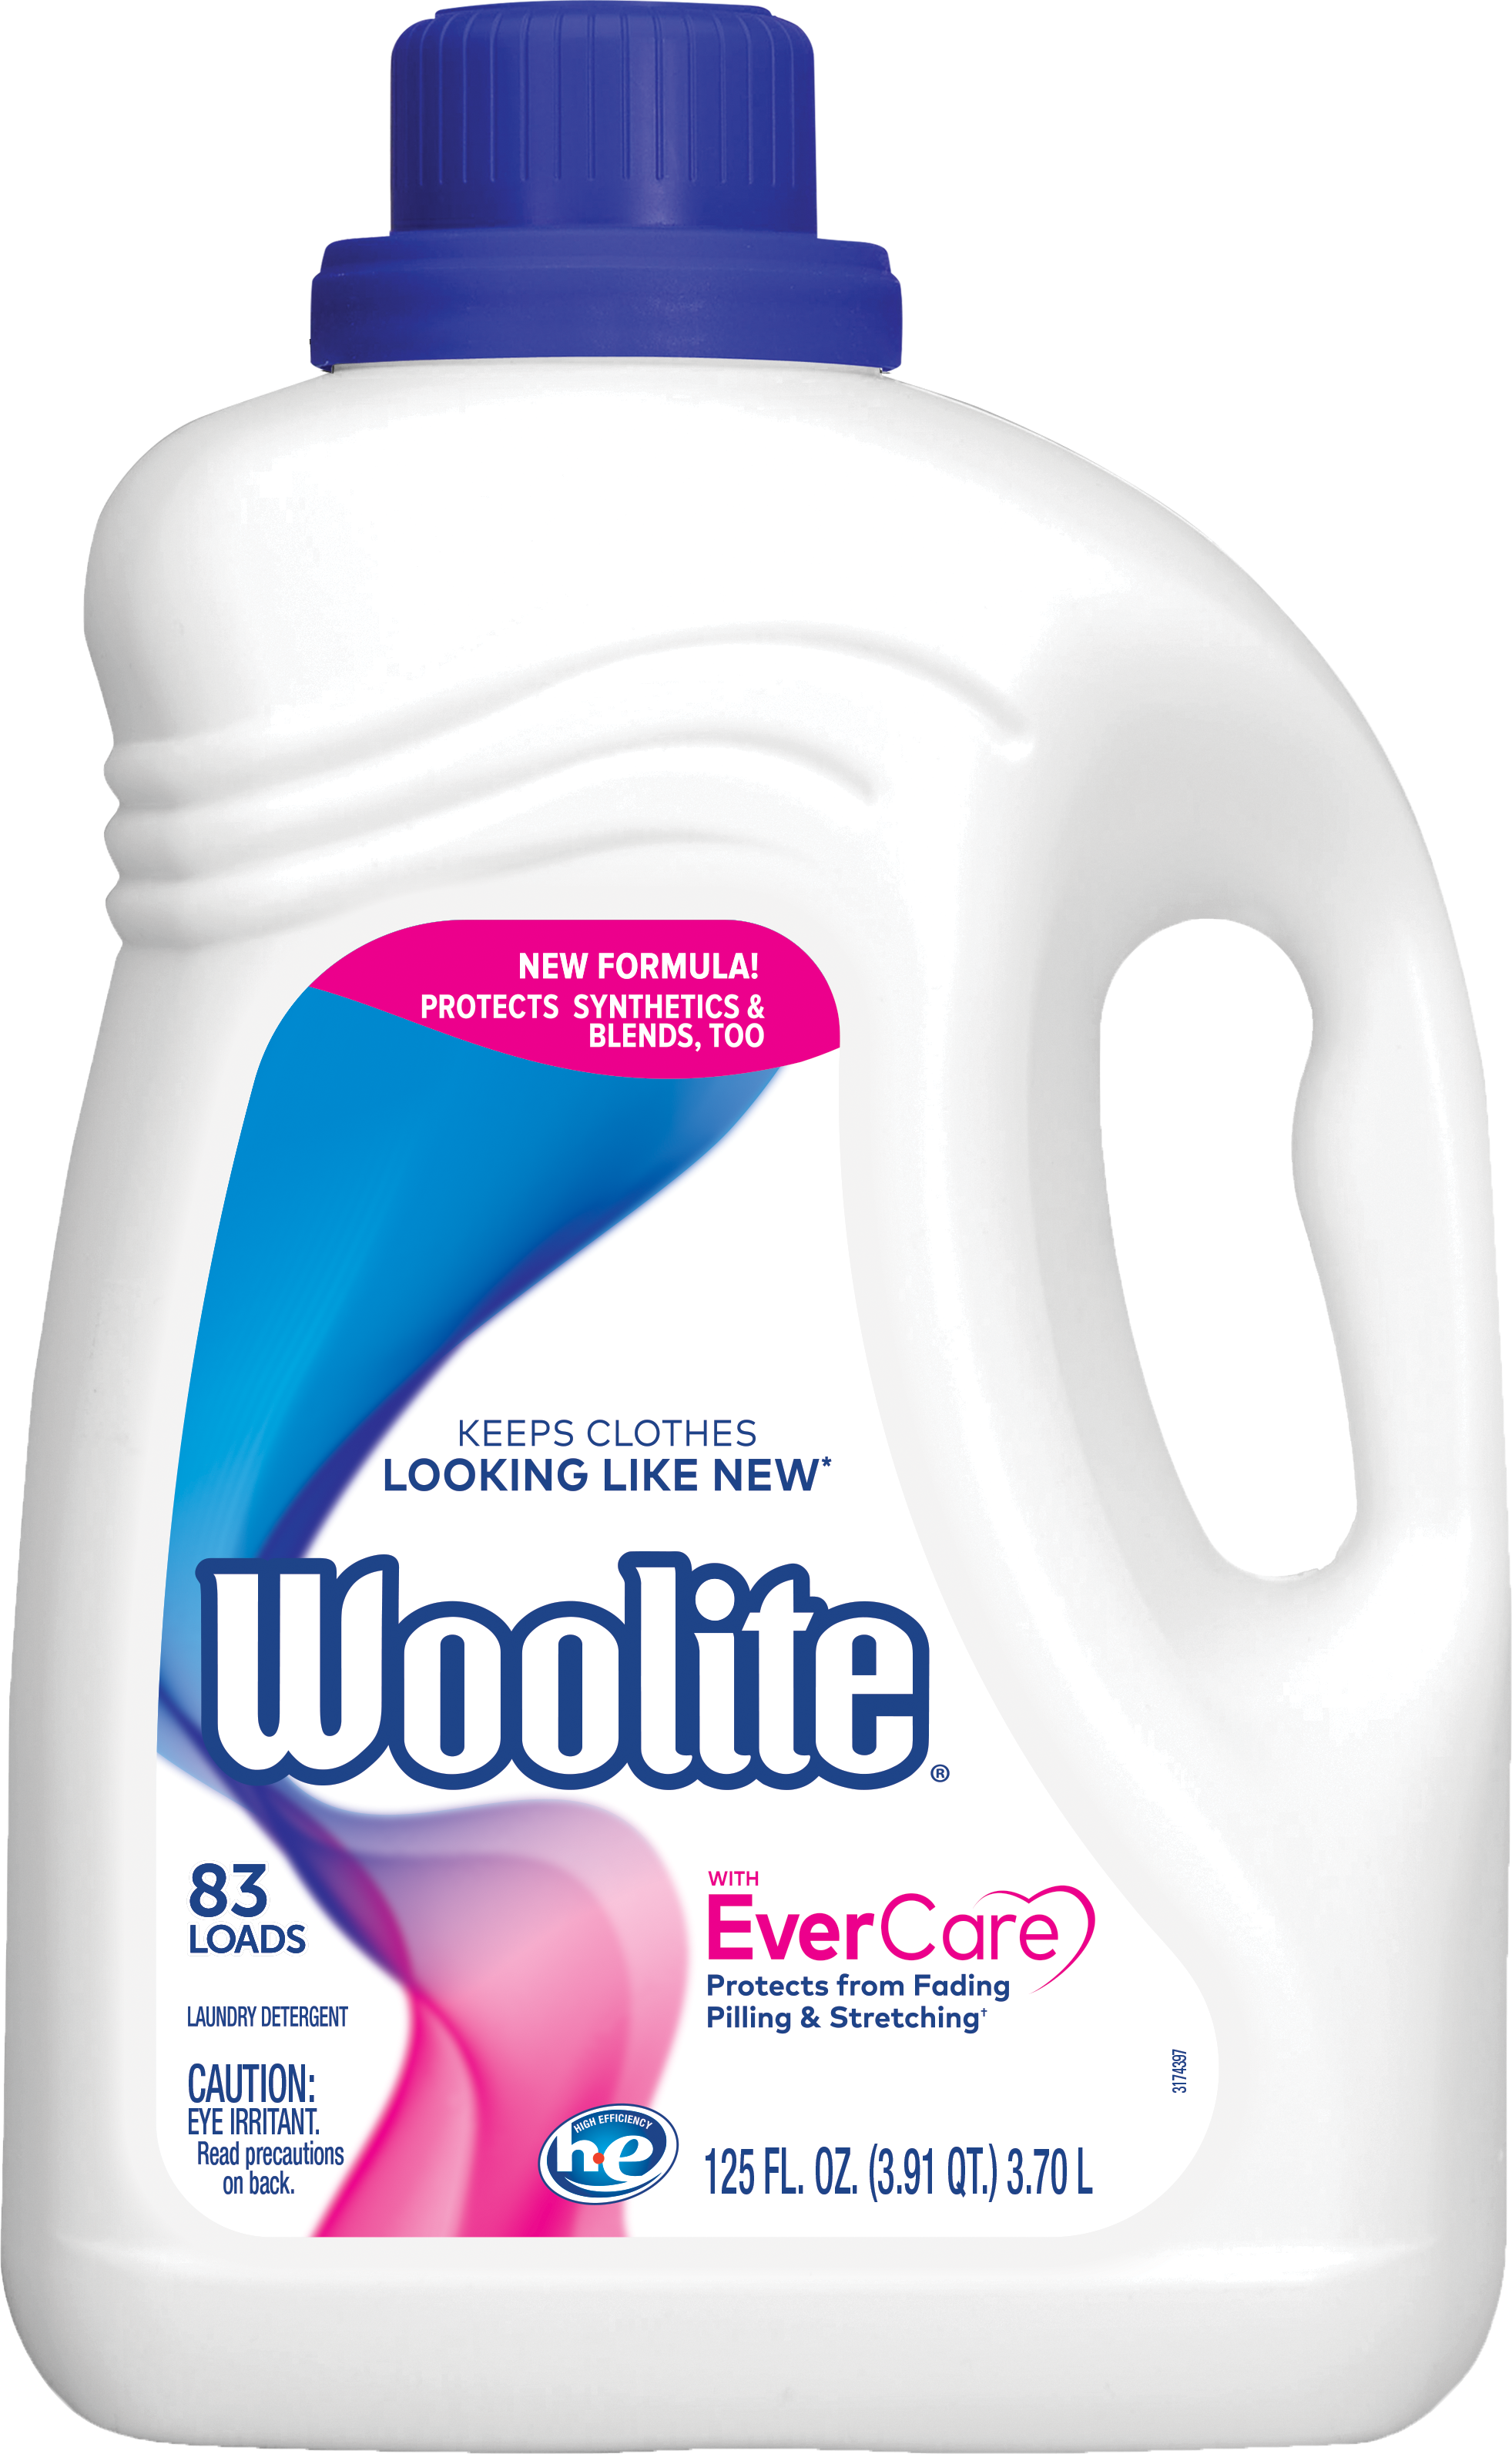 Woolite All Clothes Liquid Laundry Detergent, Sparkling Falls Scent, 83 Loads , 125oz, Regular & HE Washers, Gentle Cycle, , Packaging May Vary - image 1 of 6